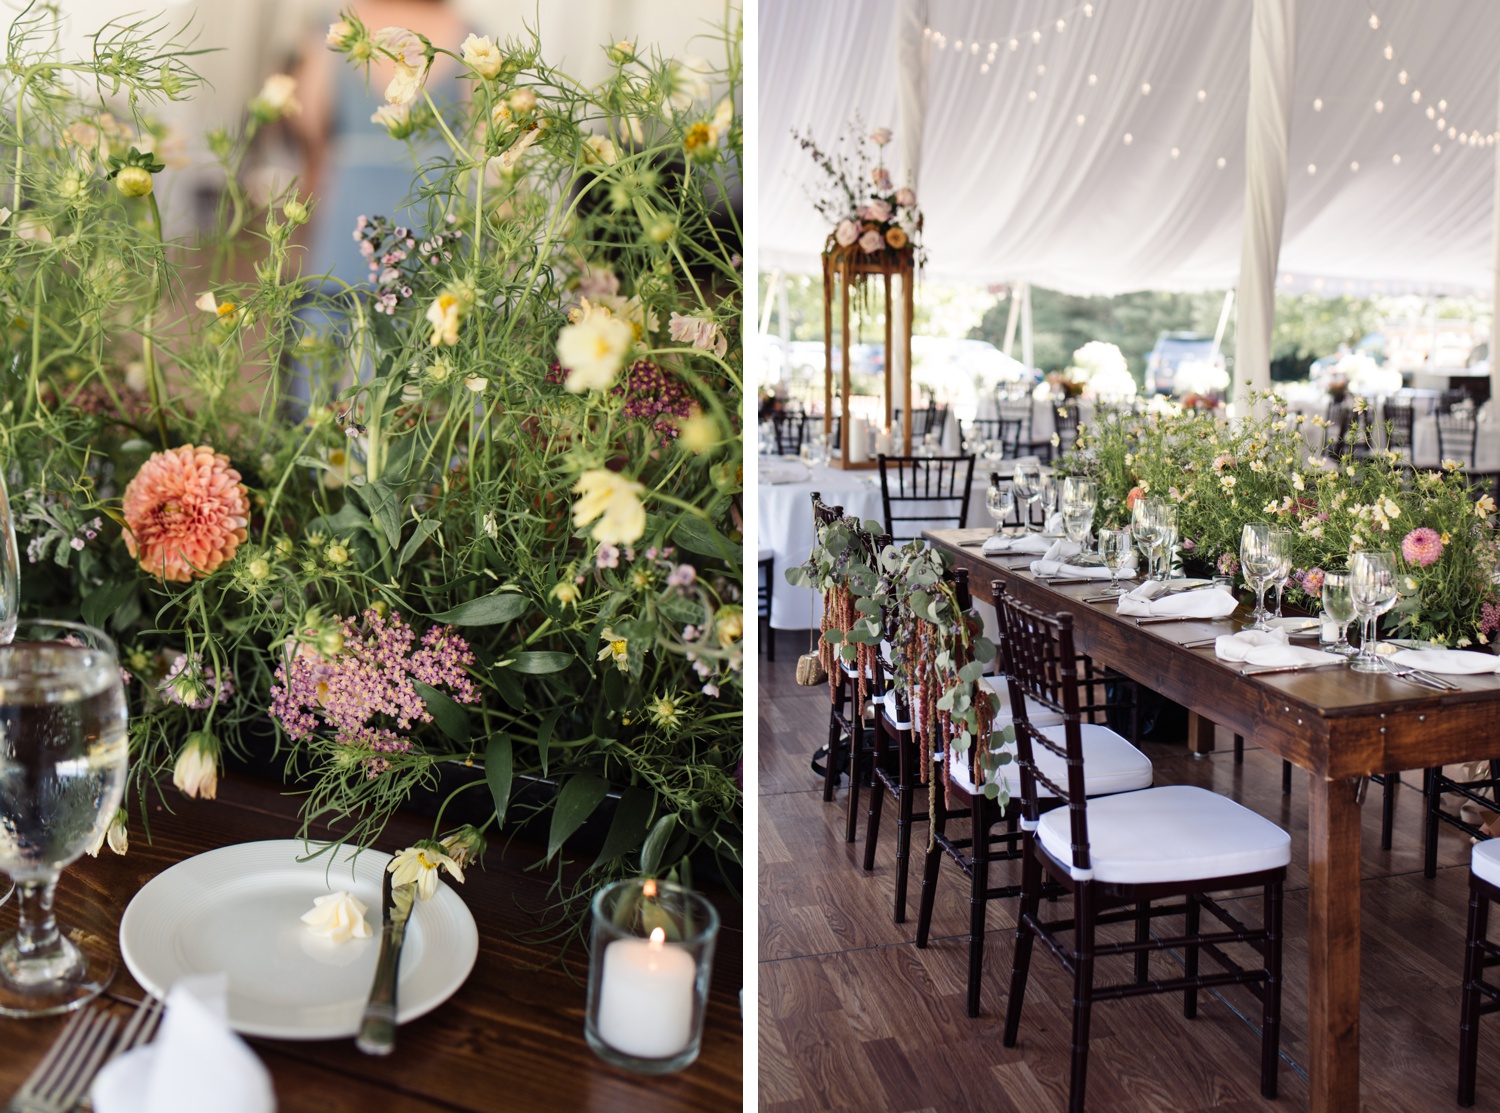 Farm tables, cafe lights, white linens, and pink, orange, and mauve florals for a summer tented wedding reception